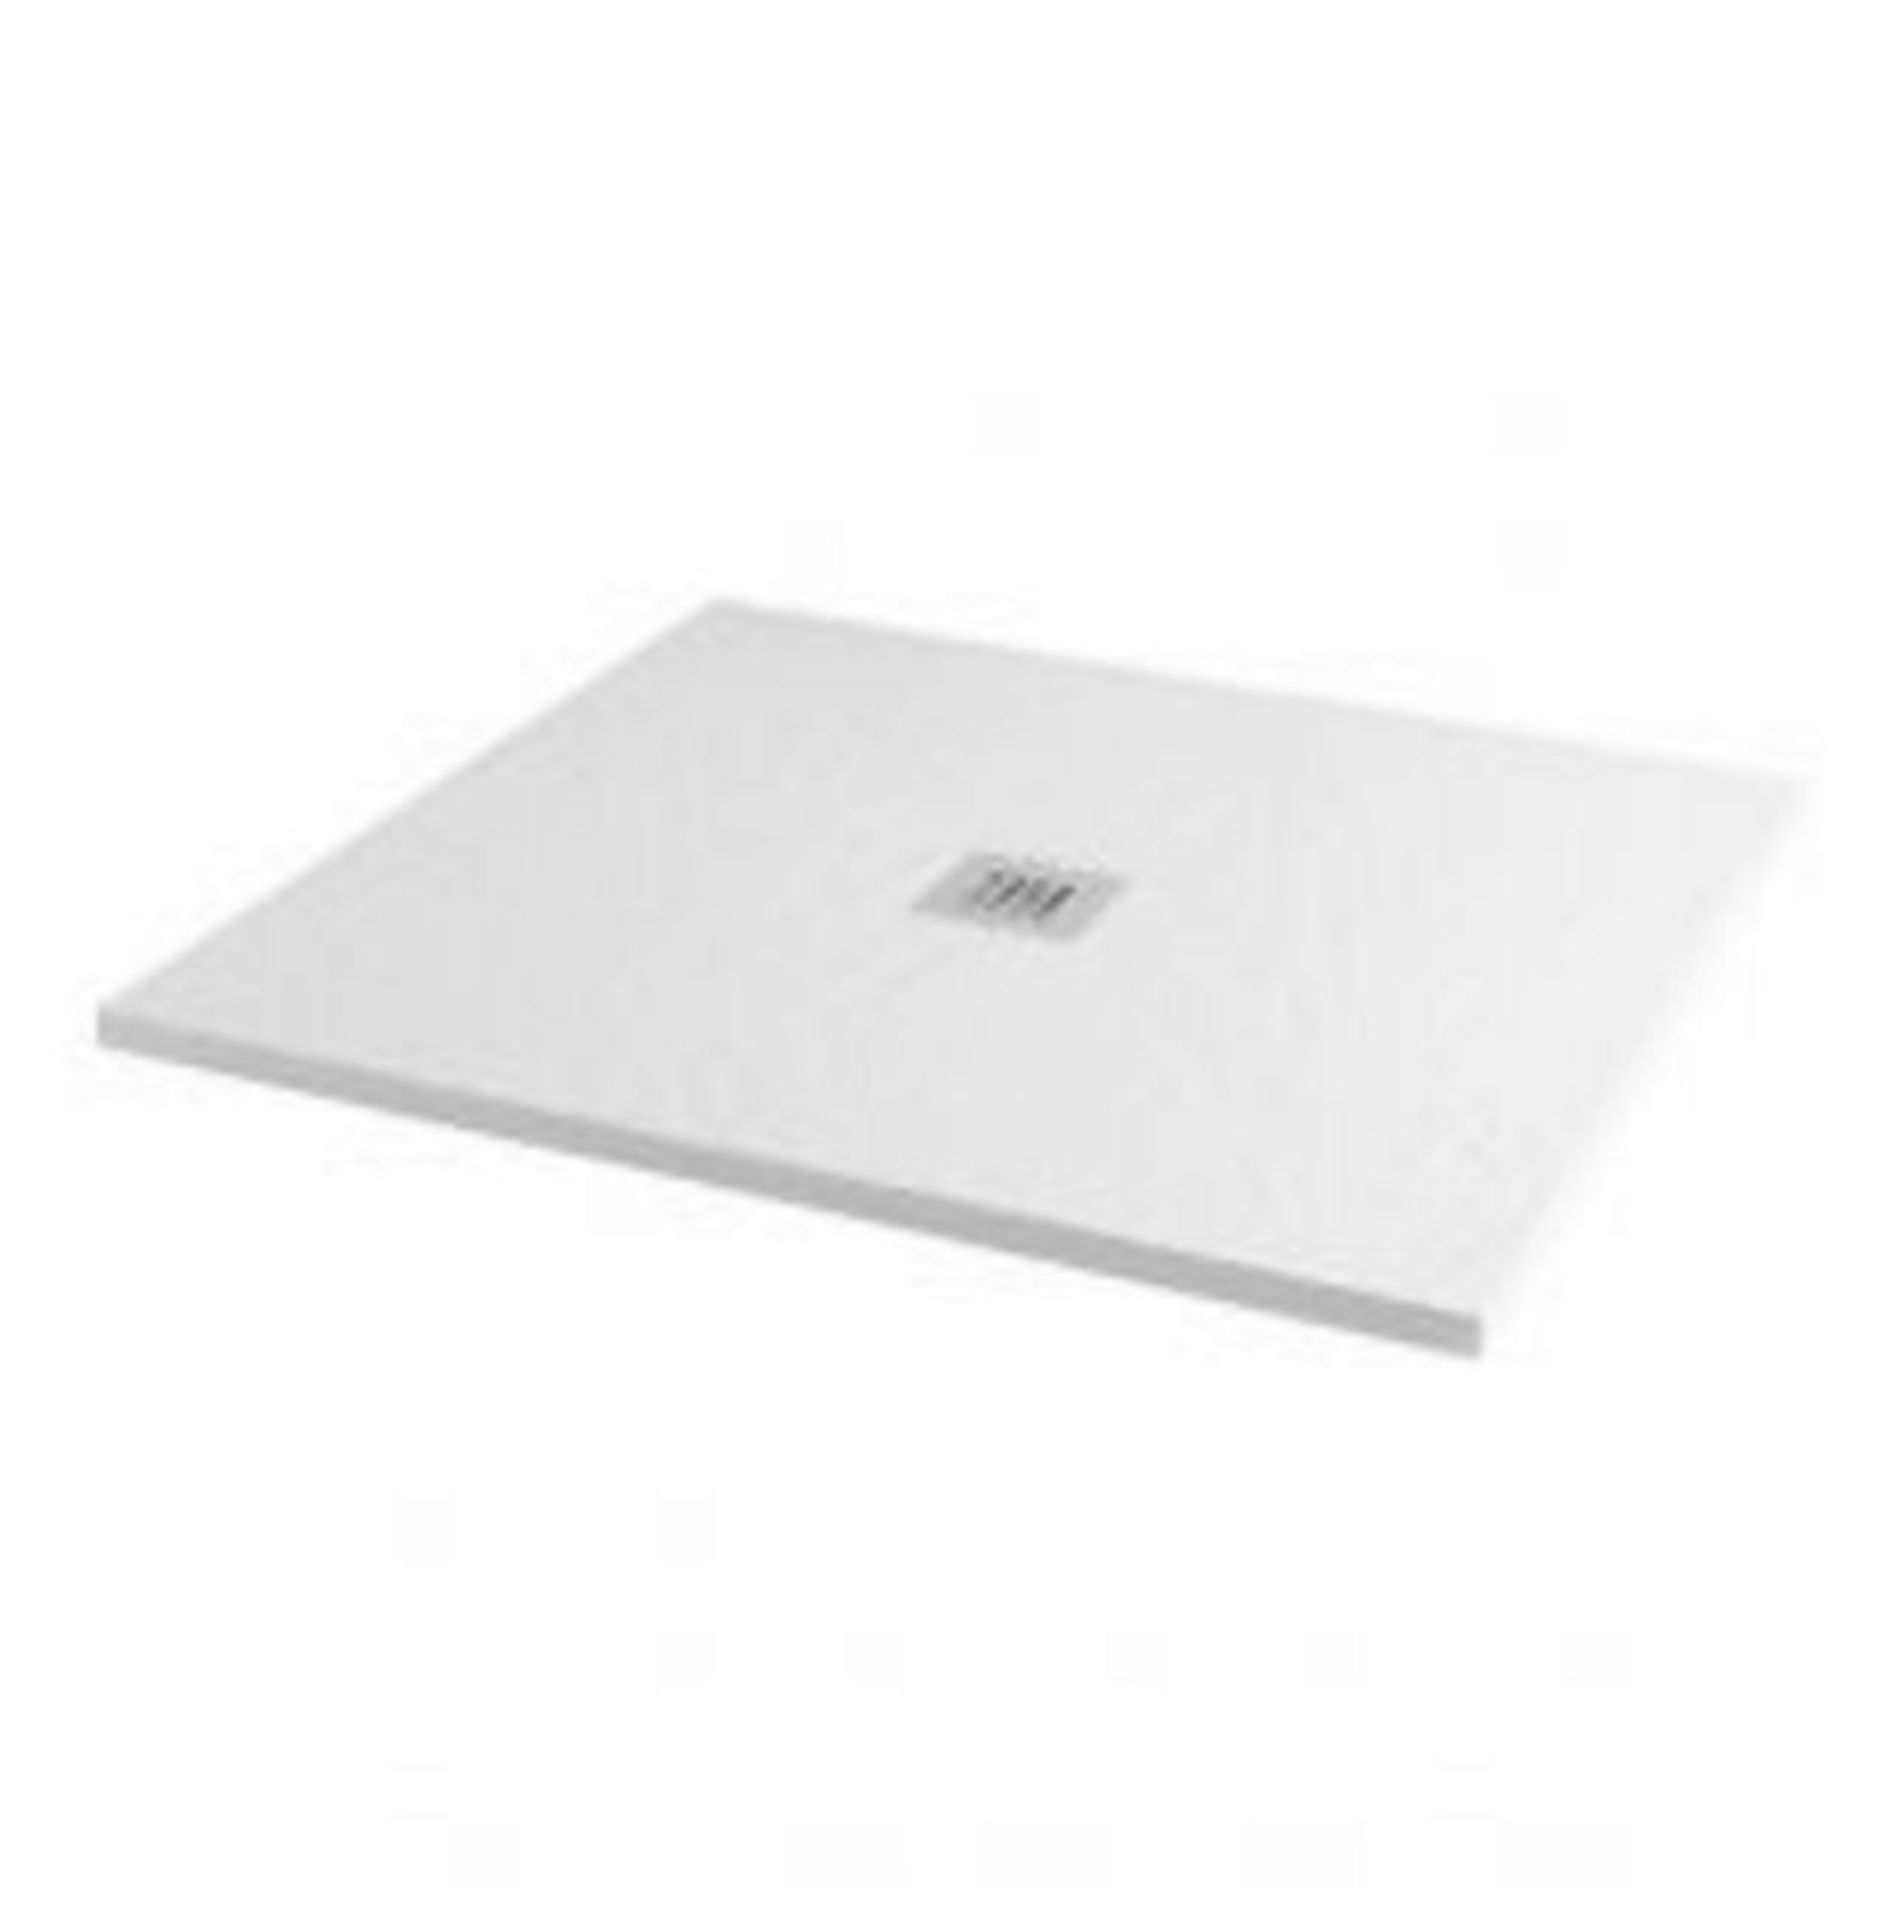 New 900x900mm Square White Slate Effect Shower Tray & Chrome Waste. Handcrafted From High-Grad... - Image 2 of 2